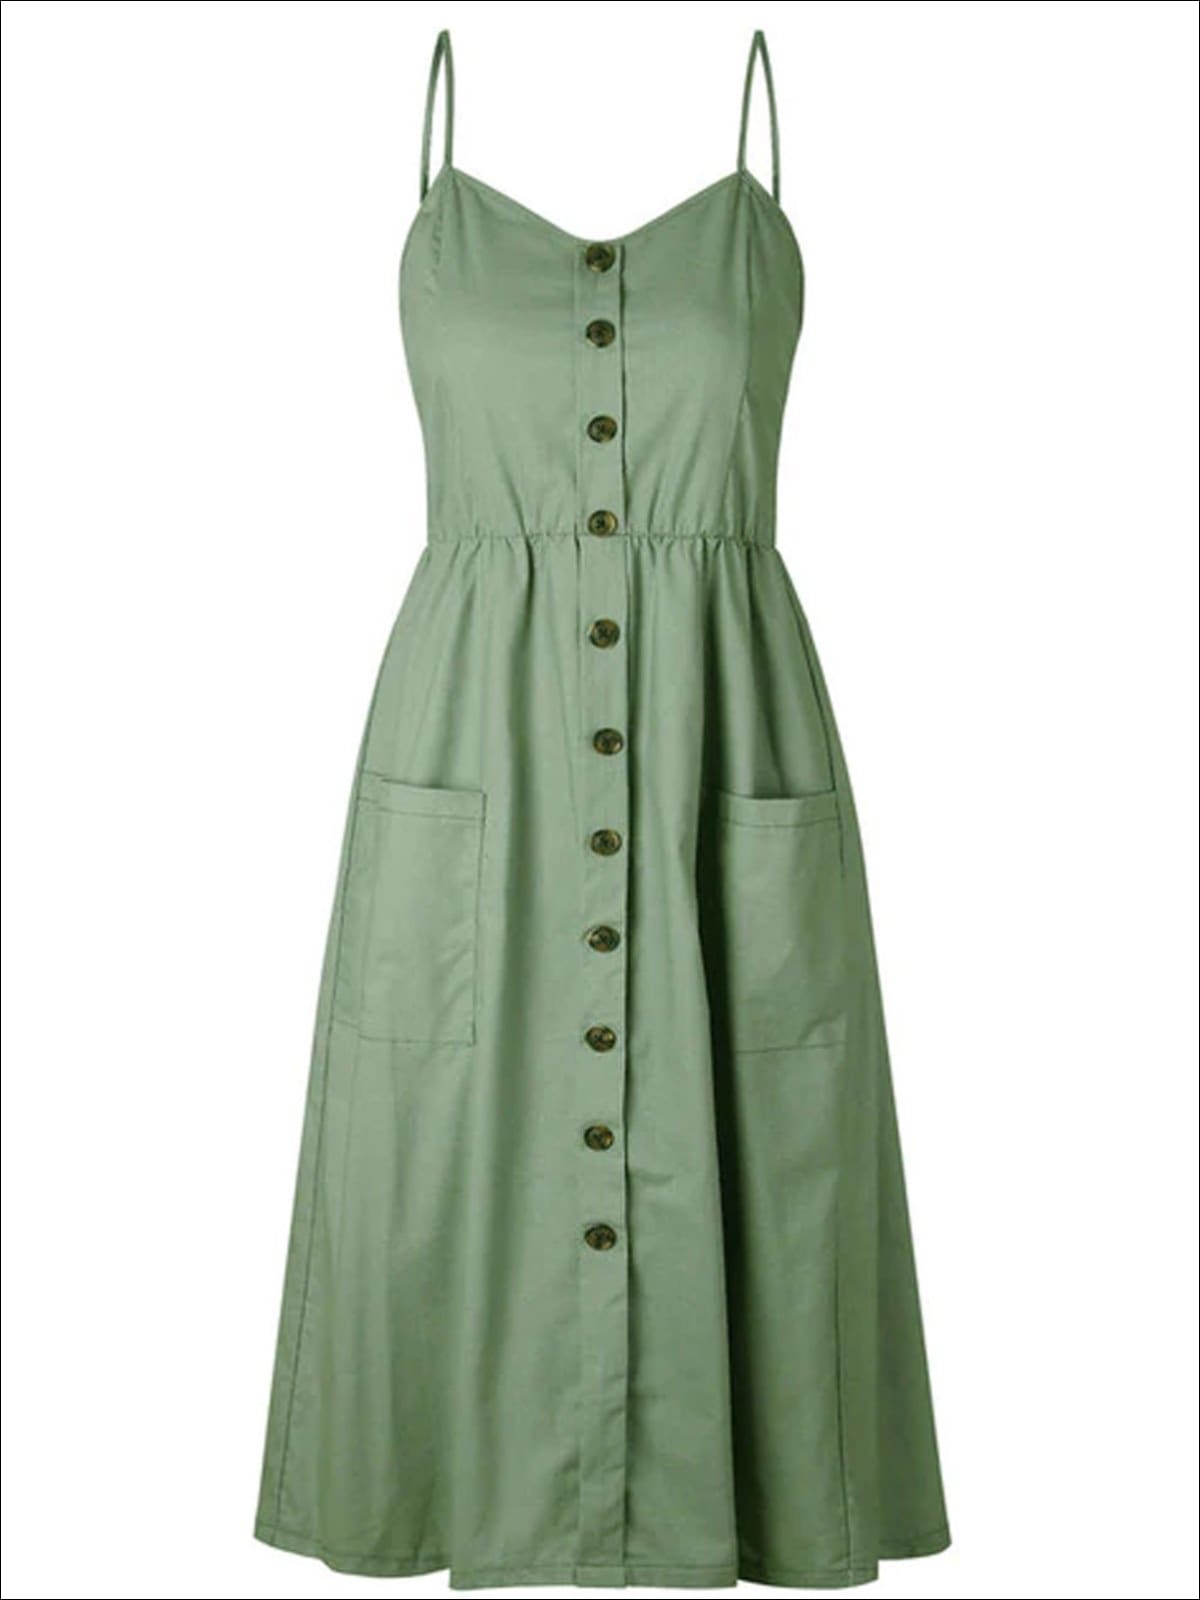 Womens Vintage Sleeveless Casual Dress With Front Pockets (Multiple Color Options) - Green / S - Womens Dresses